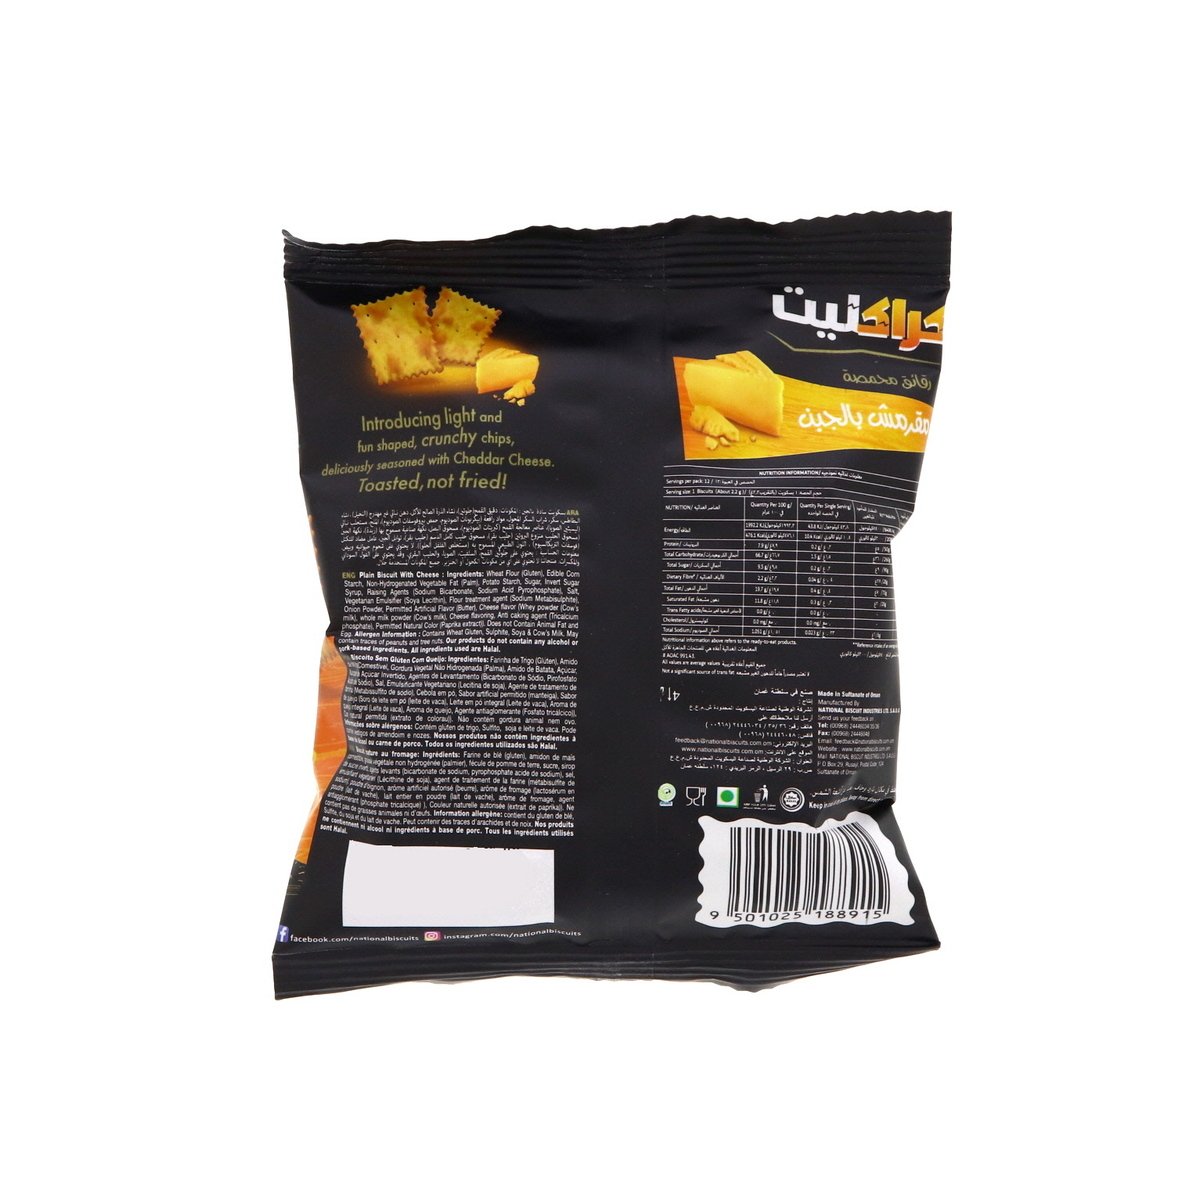 Kracklite Toasted Chips Crunchy Cheese 12 X 26g Online At Best Price Other Crisps Lulu Uae 4385